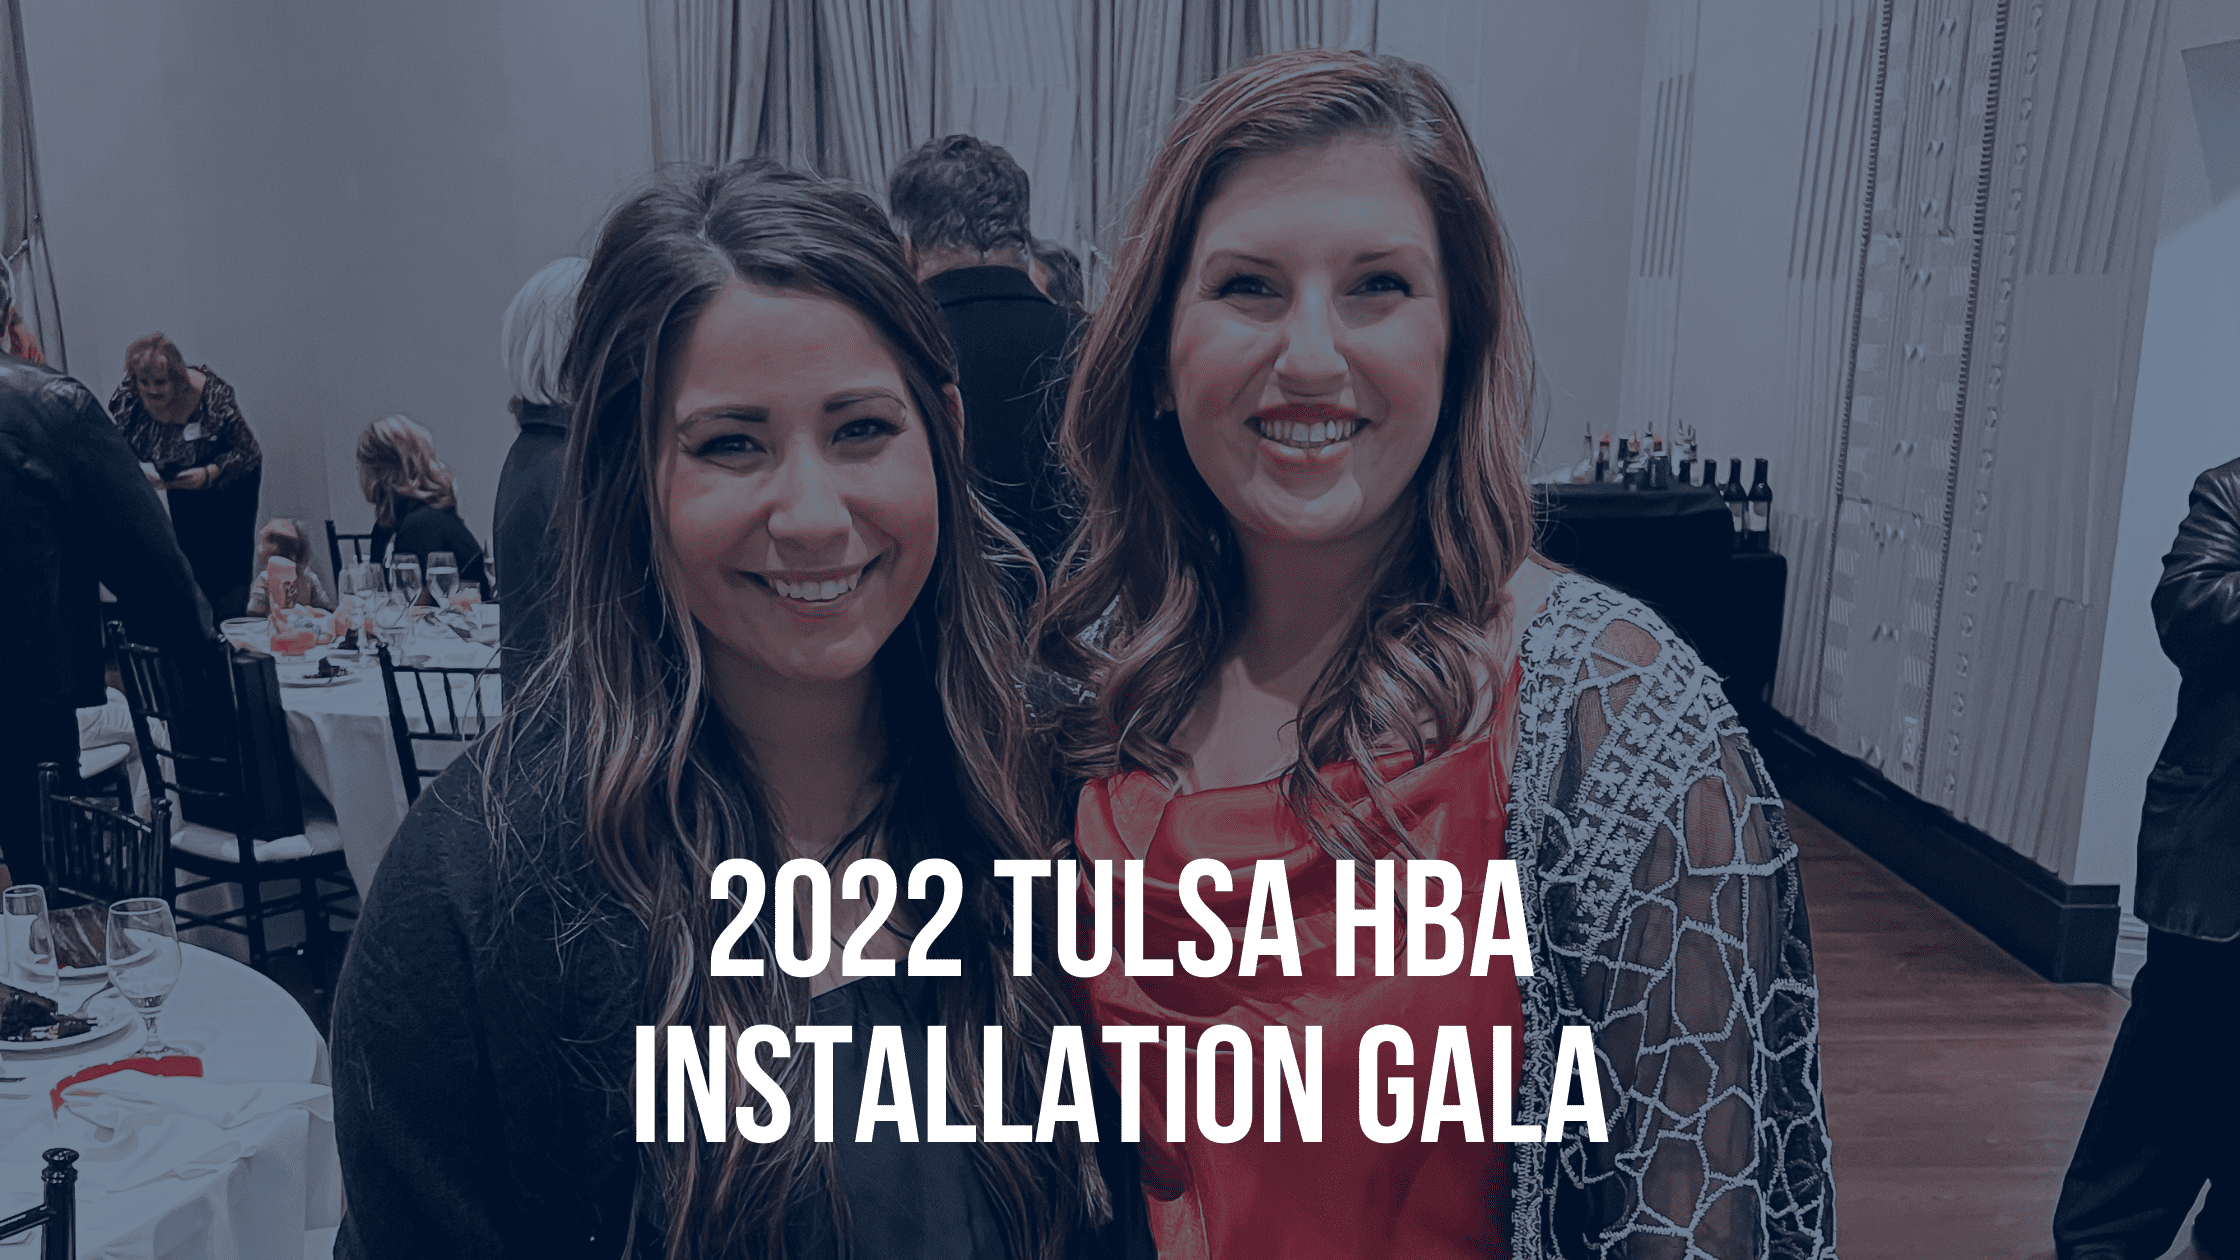 A Night out with the Tulsa HBA